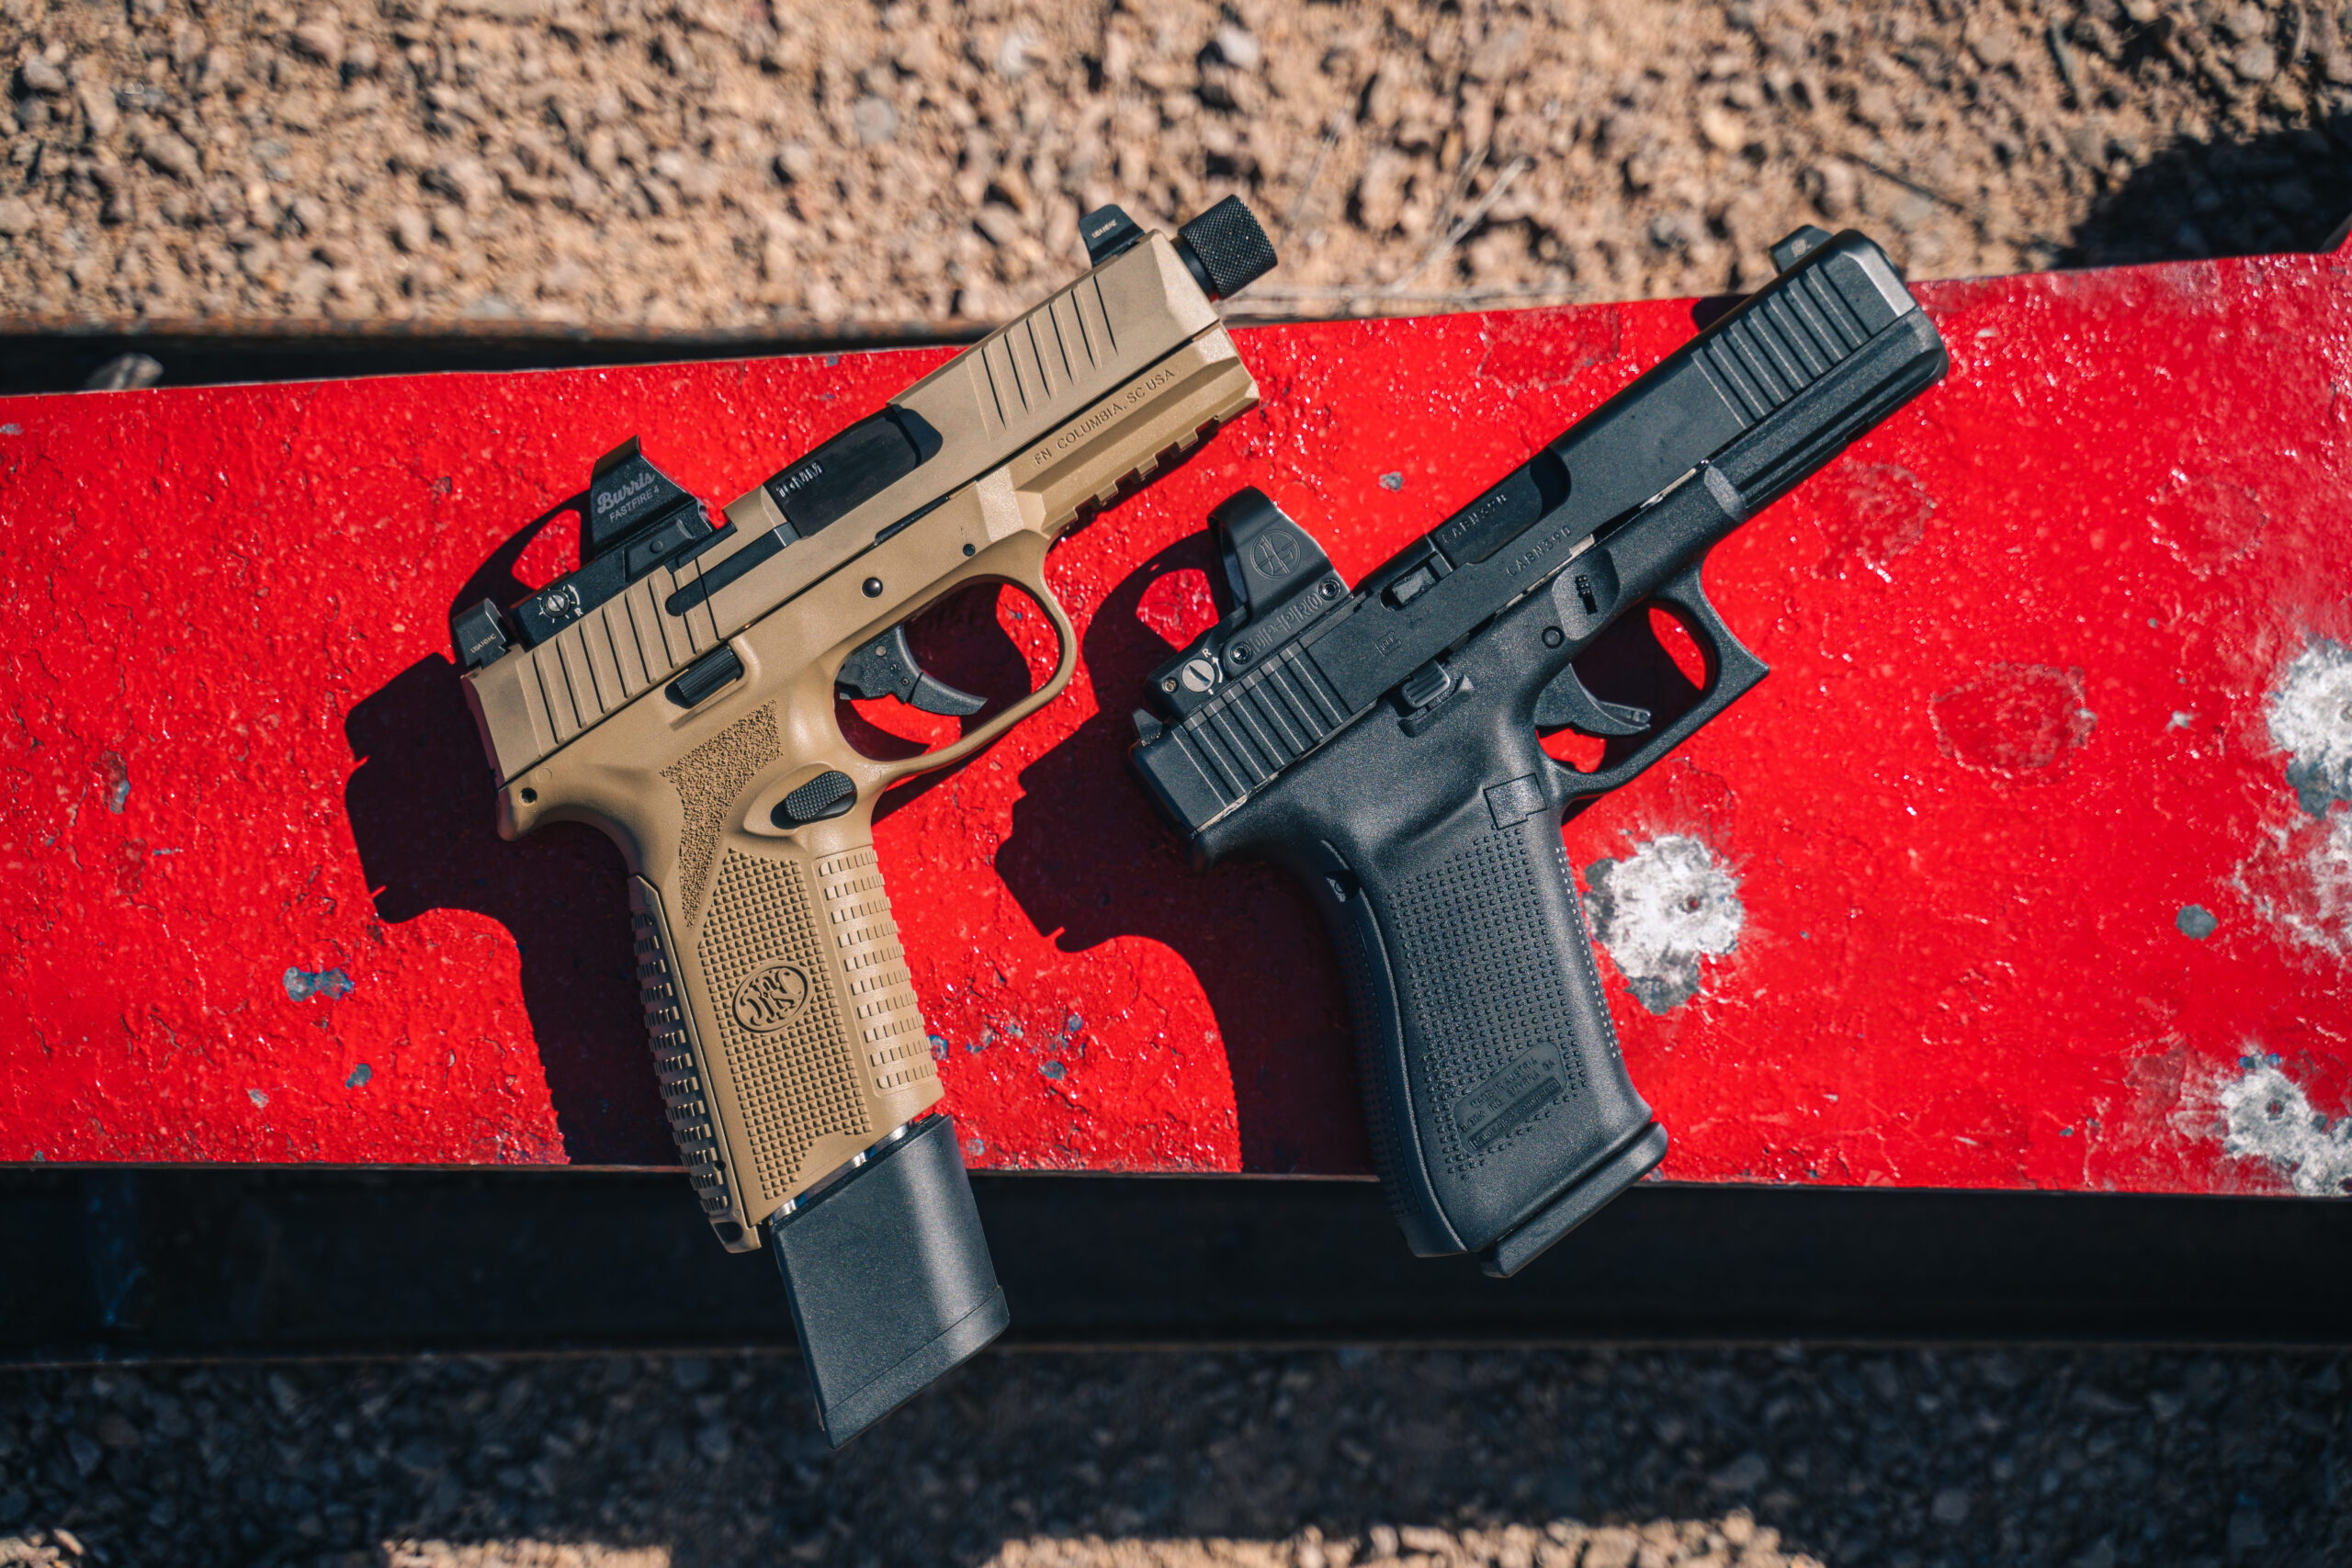 FN and Glock 10mm pistols